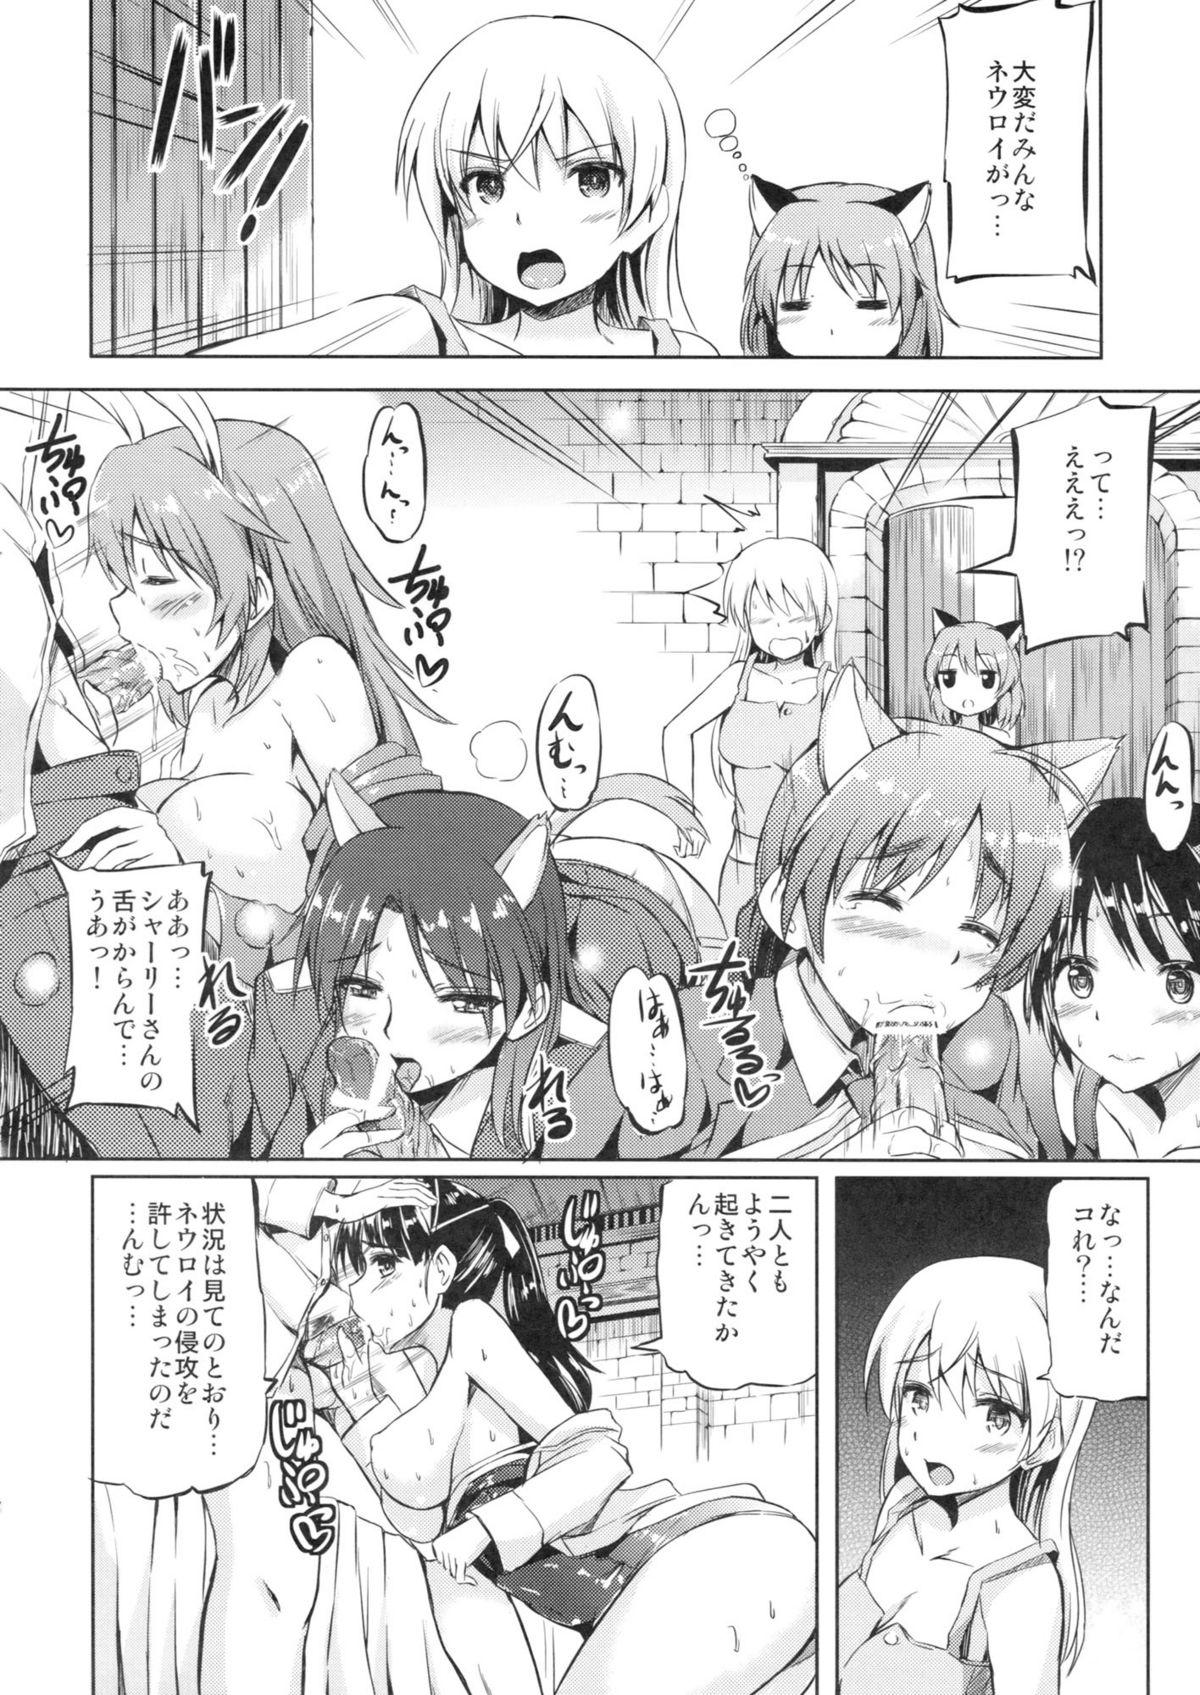 Trimmed Delicious Witches! - Strike witches Cbt - Page 4